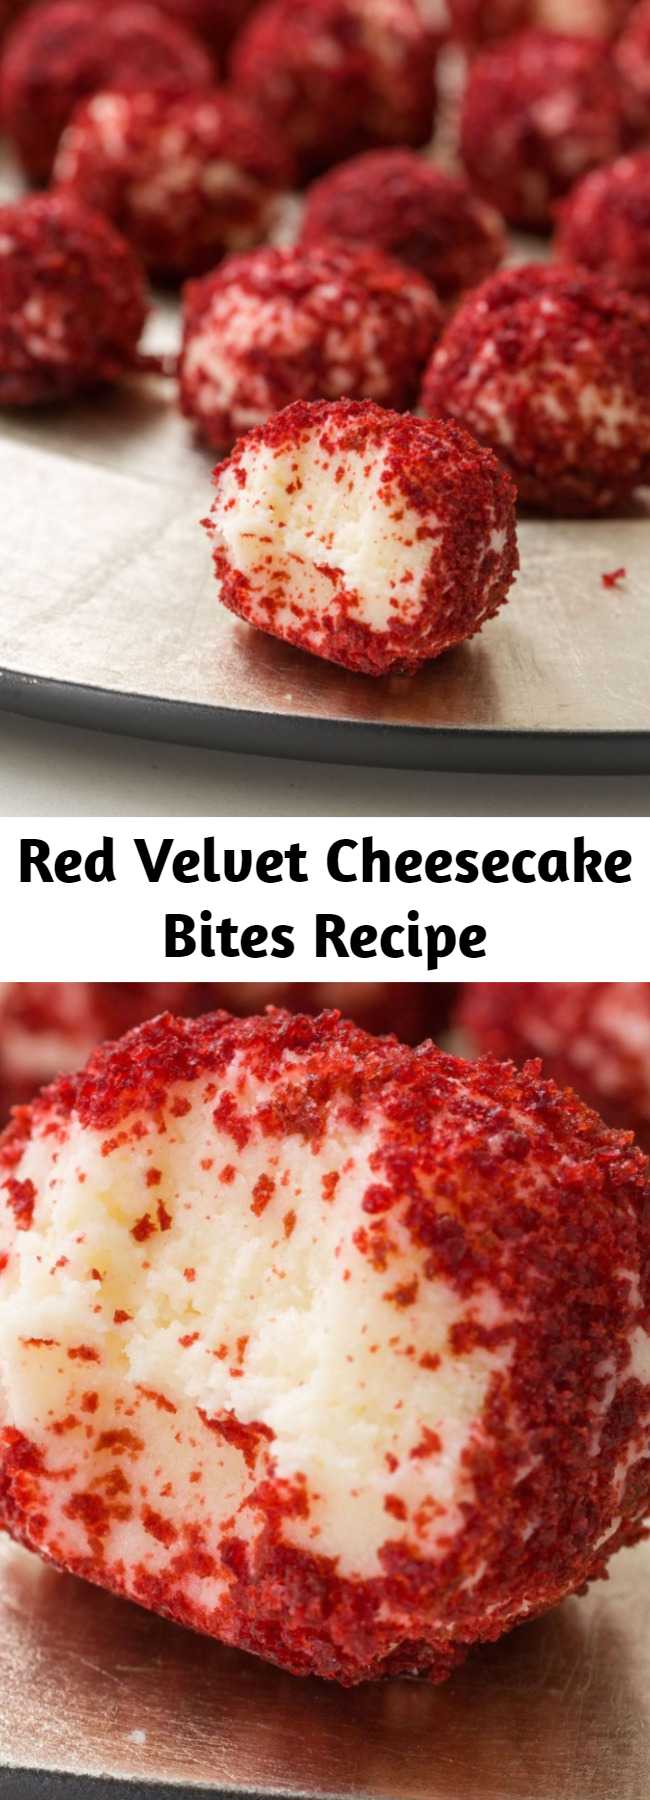 Red Velvet Cheesecake Bites Recipe - Need an easy recipe for holiday truffles? Covered in red velvet cake crumbs, these sweet cheesecake balls are the perfect small bite for any holiday party.